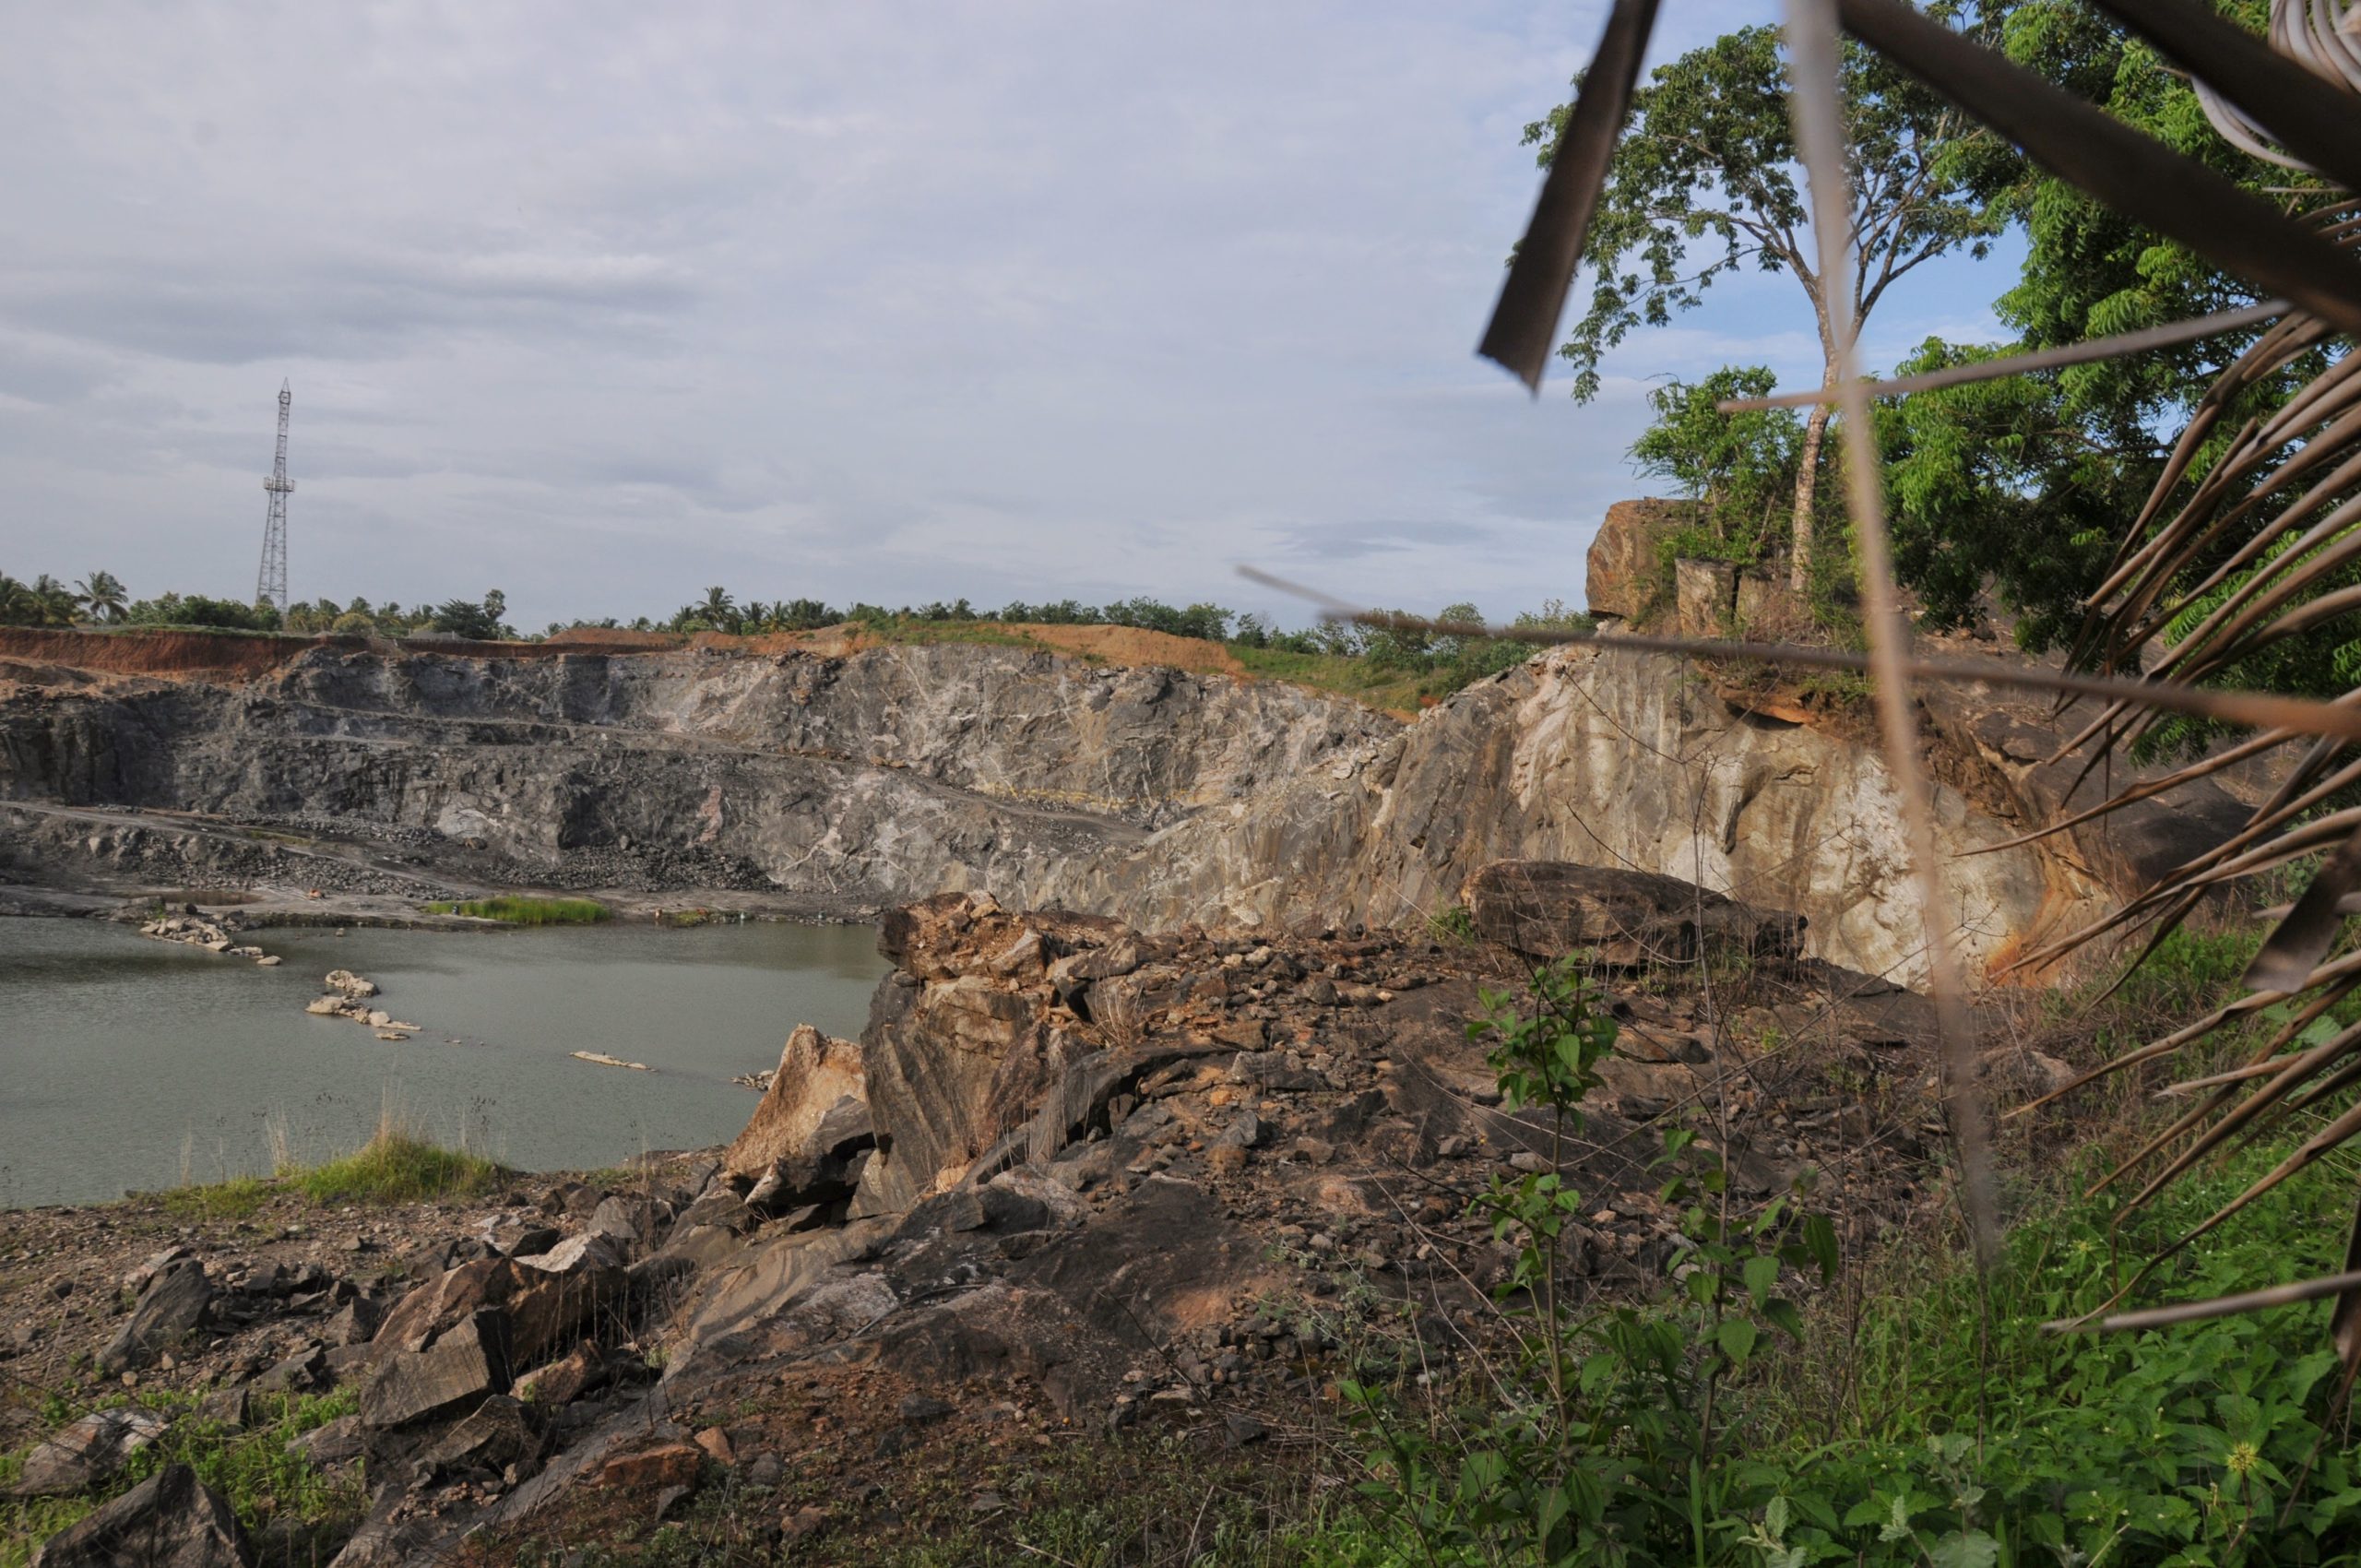 Stone quarries aggravate landslides every monsoon, but Kerala is yet to address the issue